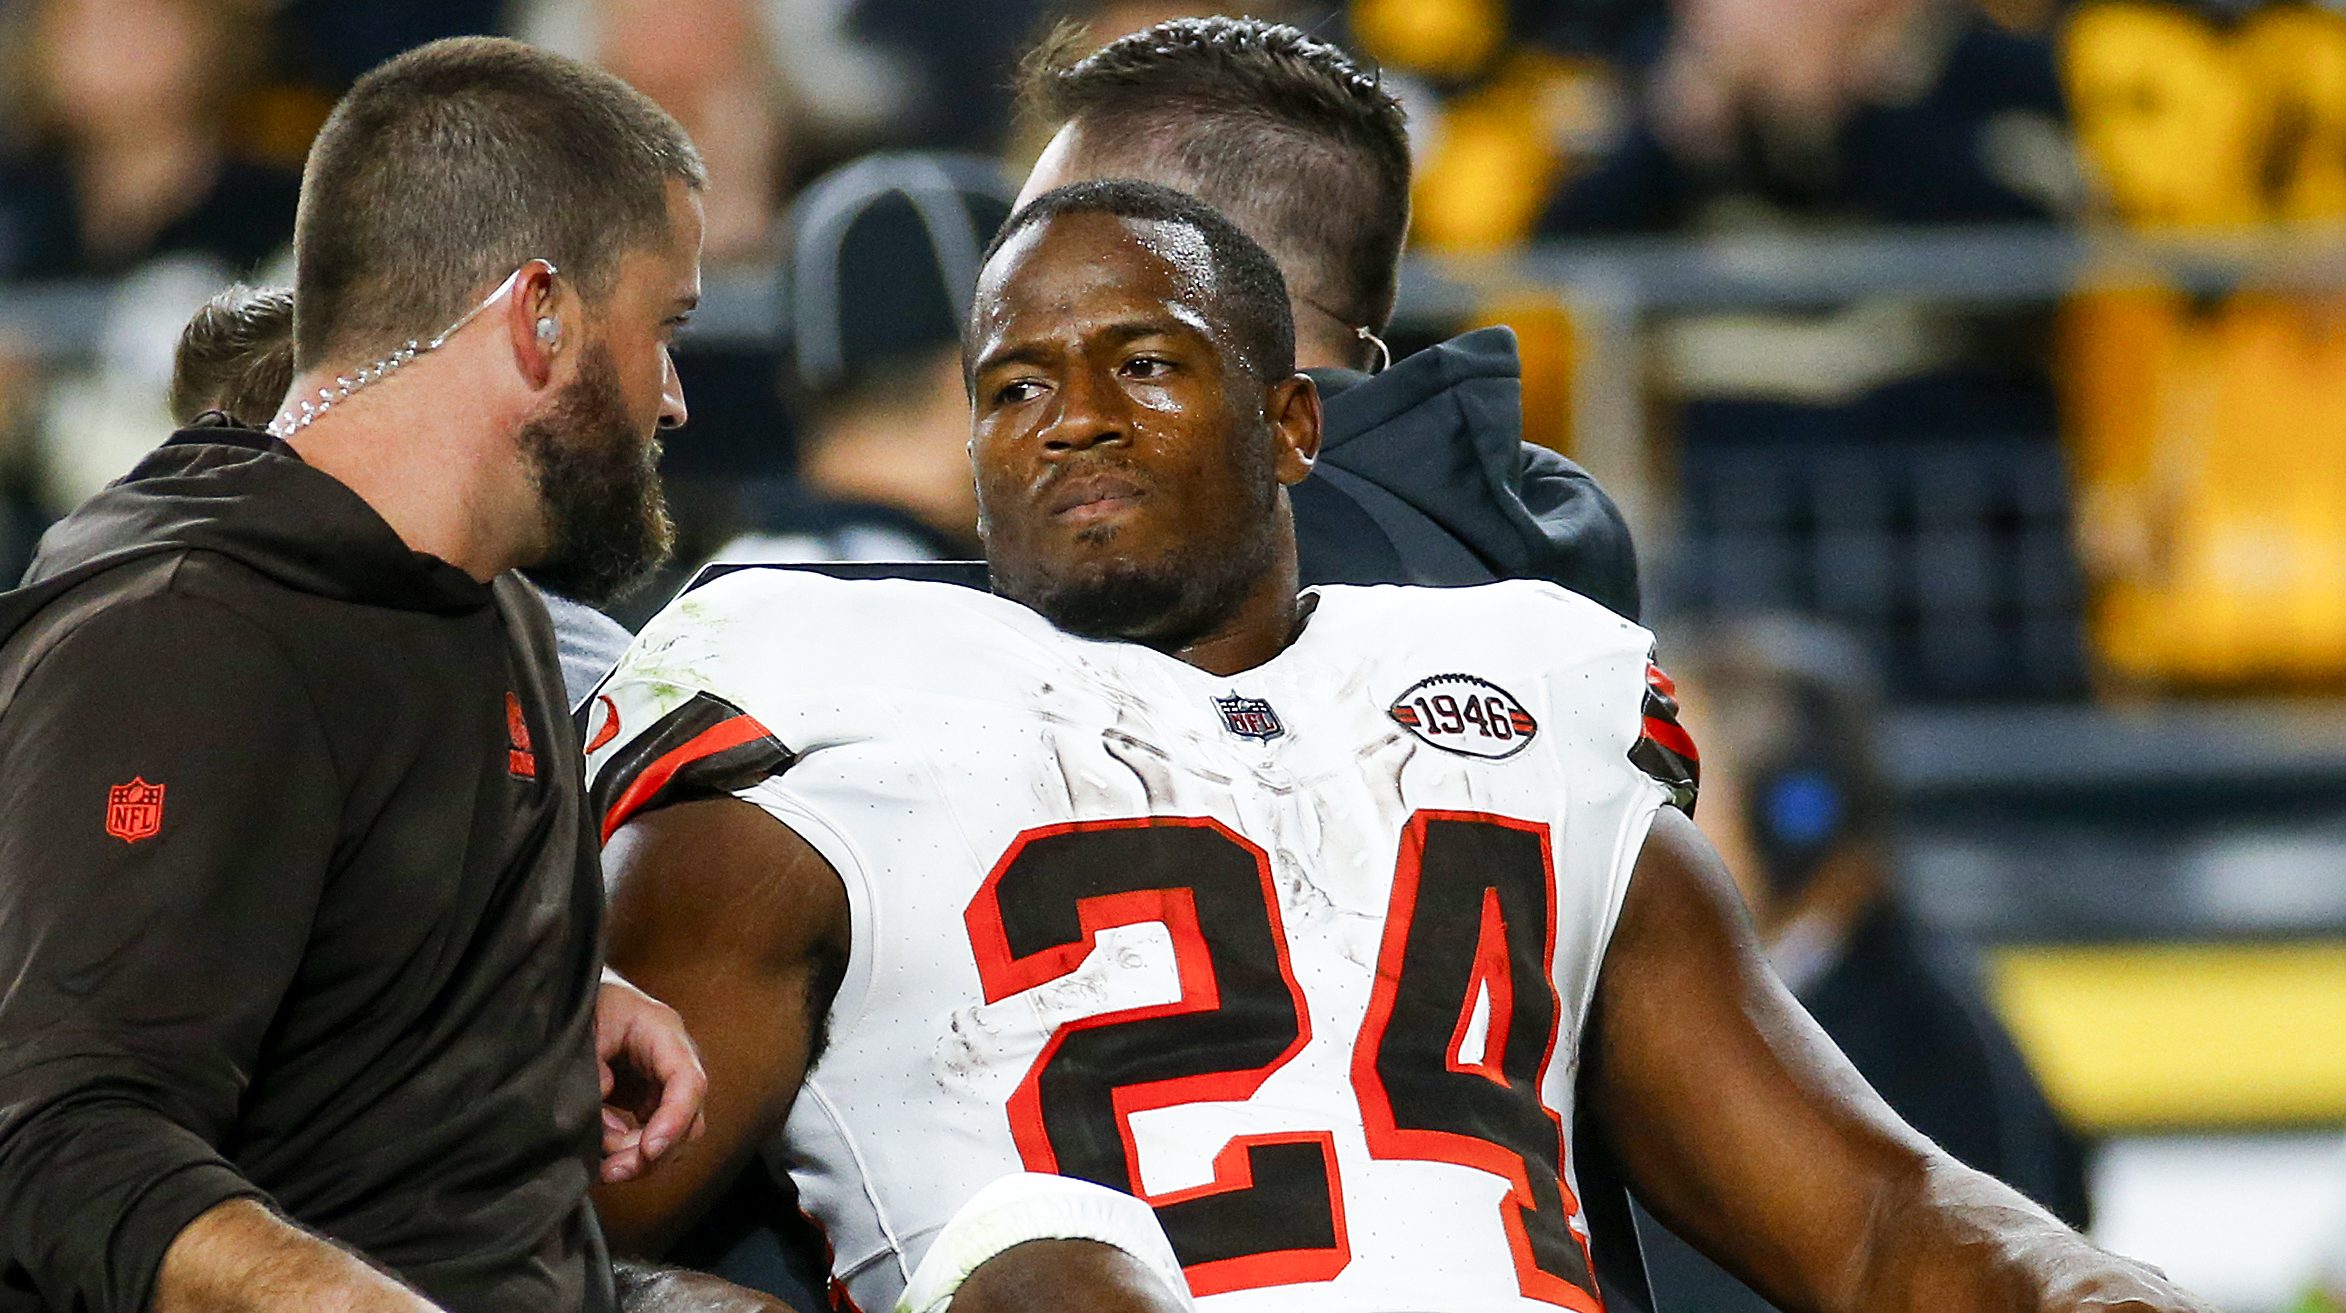 NBC Chicago reports on the NFL community’s response to Chubb’s knee injury